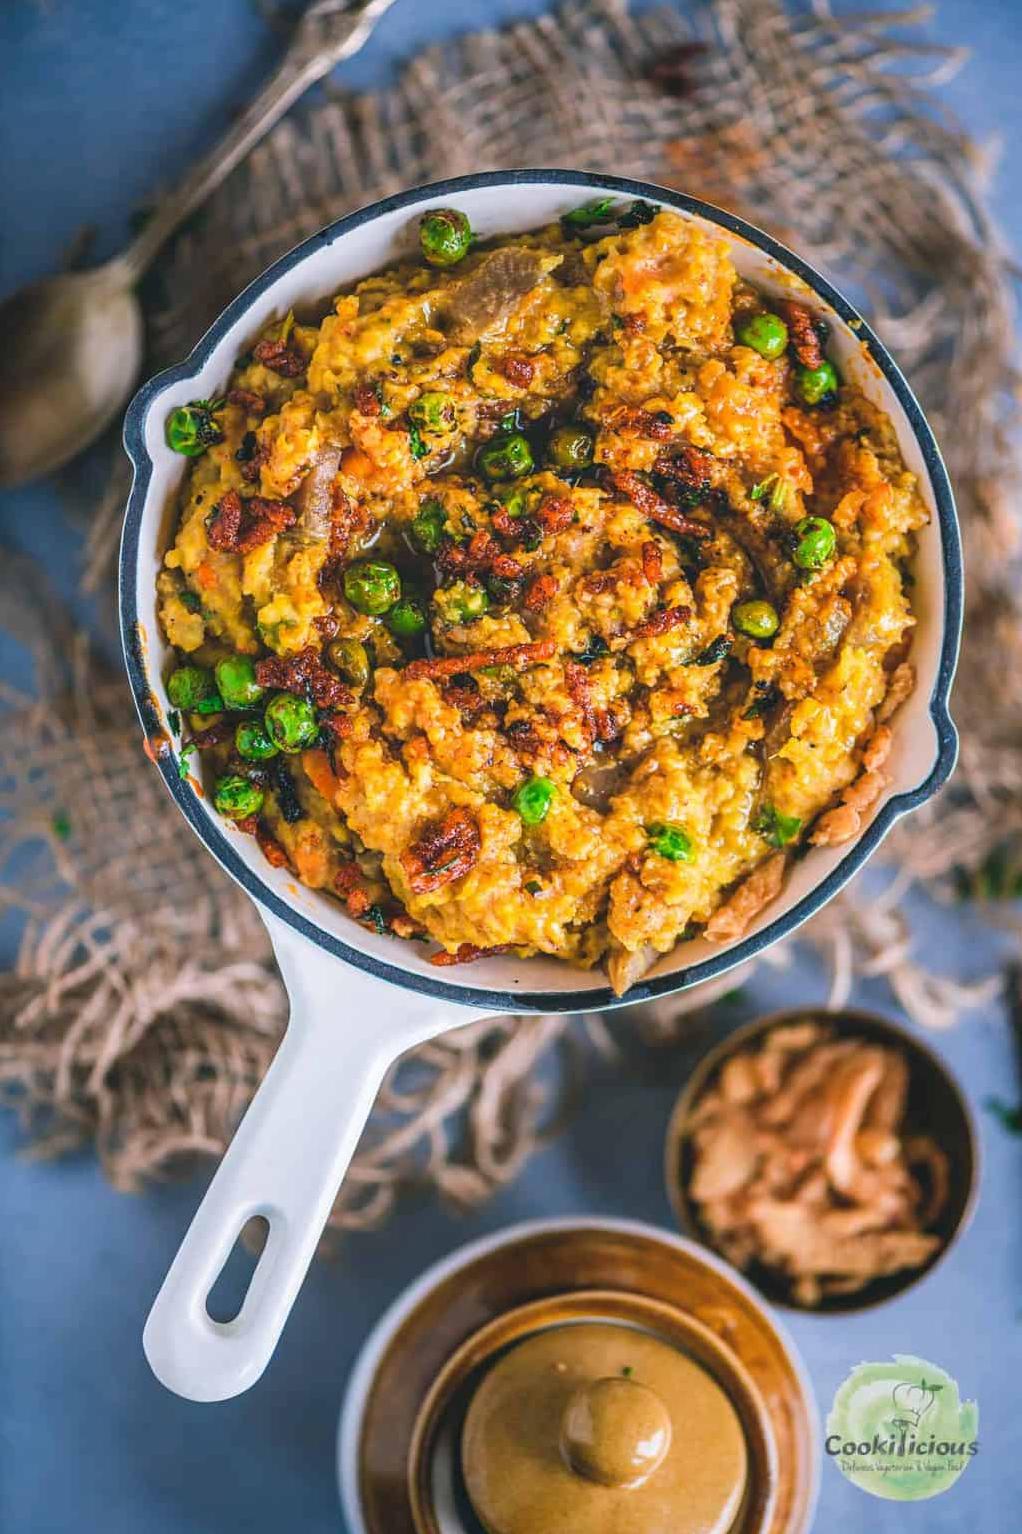  This Instant Pot khichadi is the perfect weeknight dinner solution